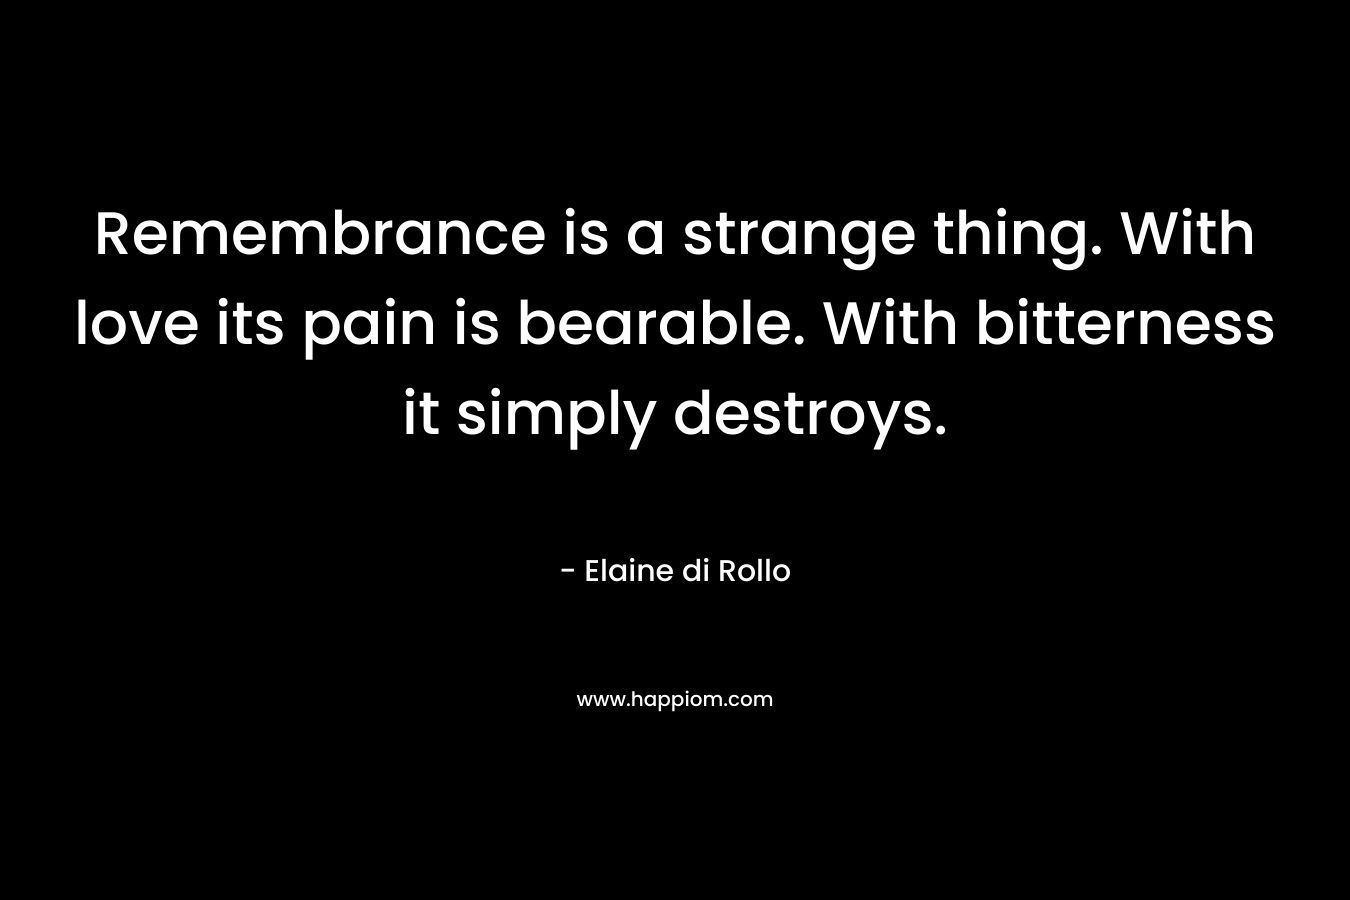 Remembrance is a strange thing. With love its pain is bearable. With bitterness it simply destroys.